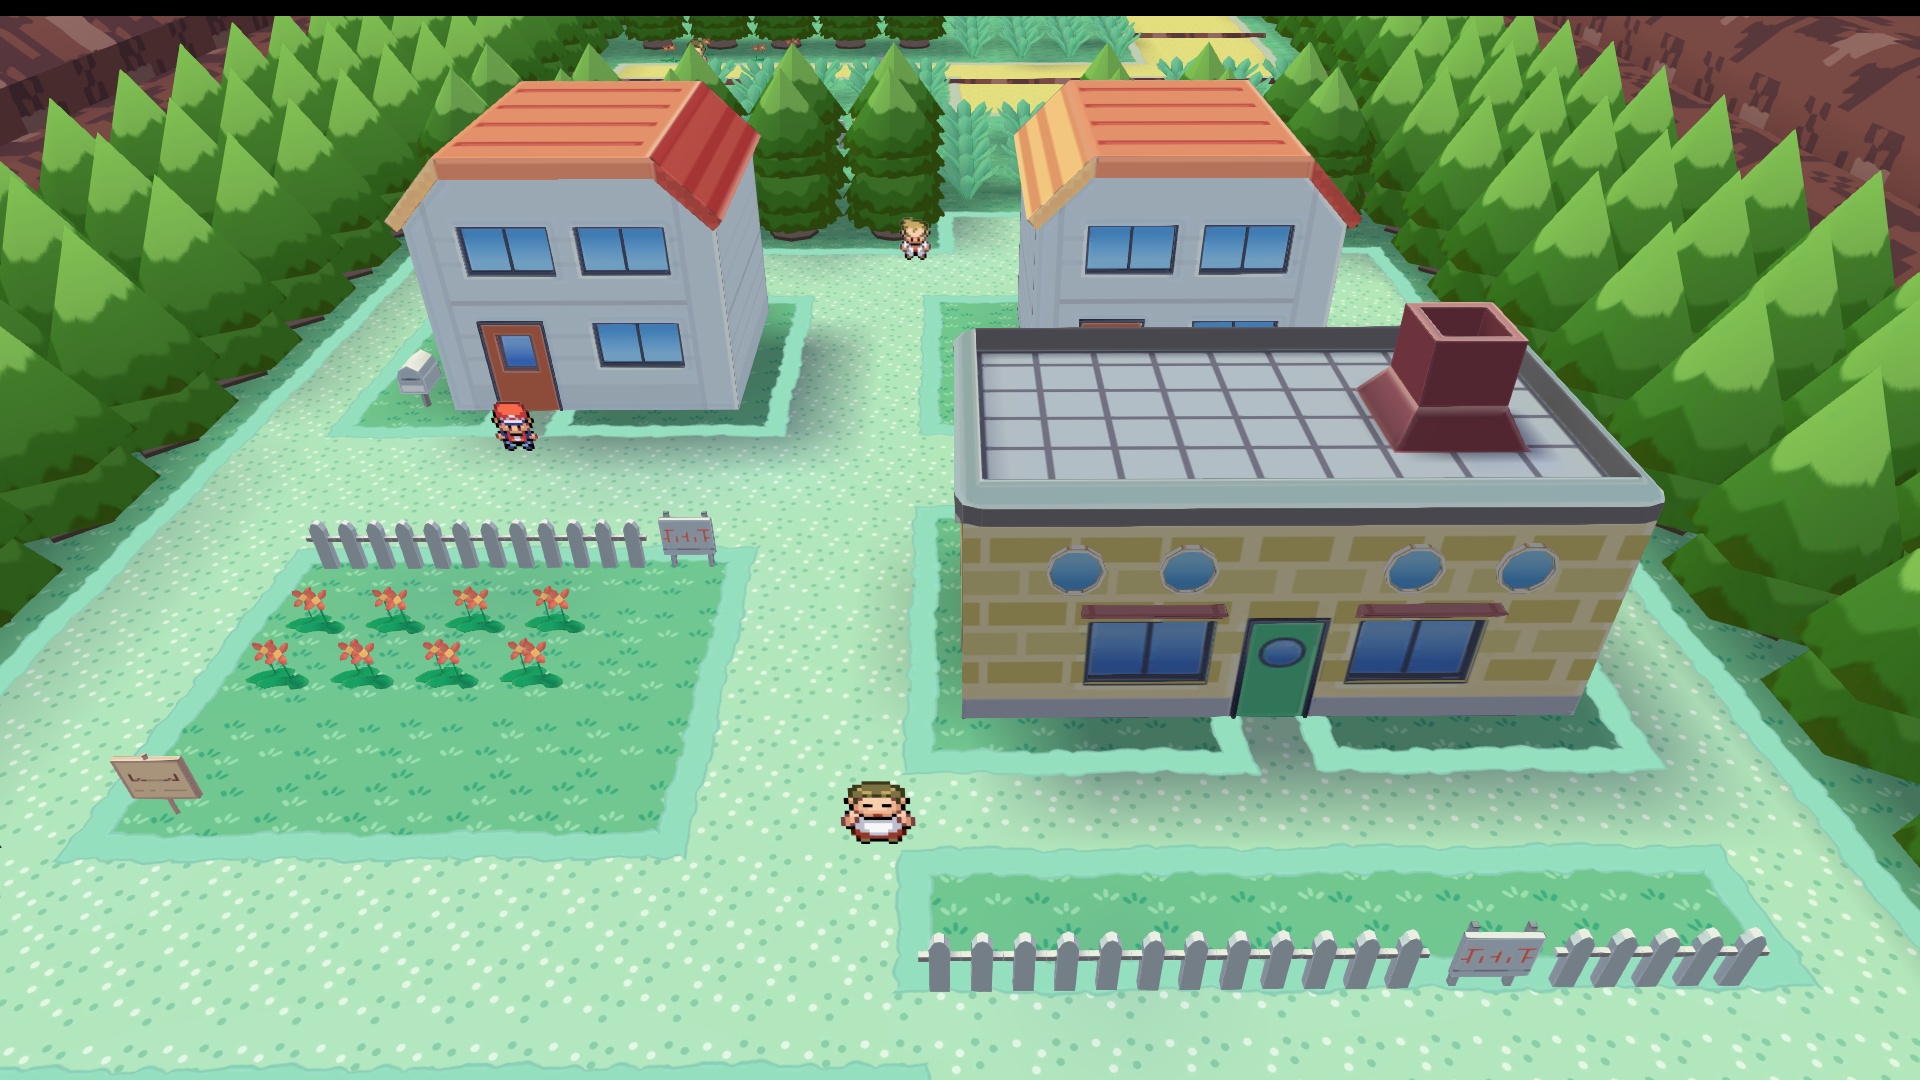 More information about "Pokemon - Pallet Town, Route 1, Viridian City"